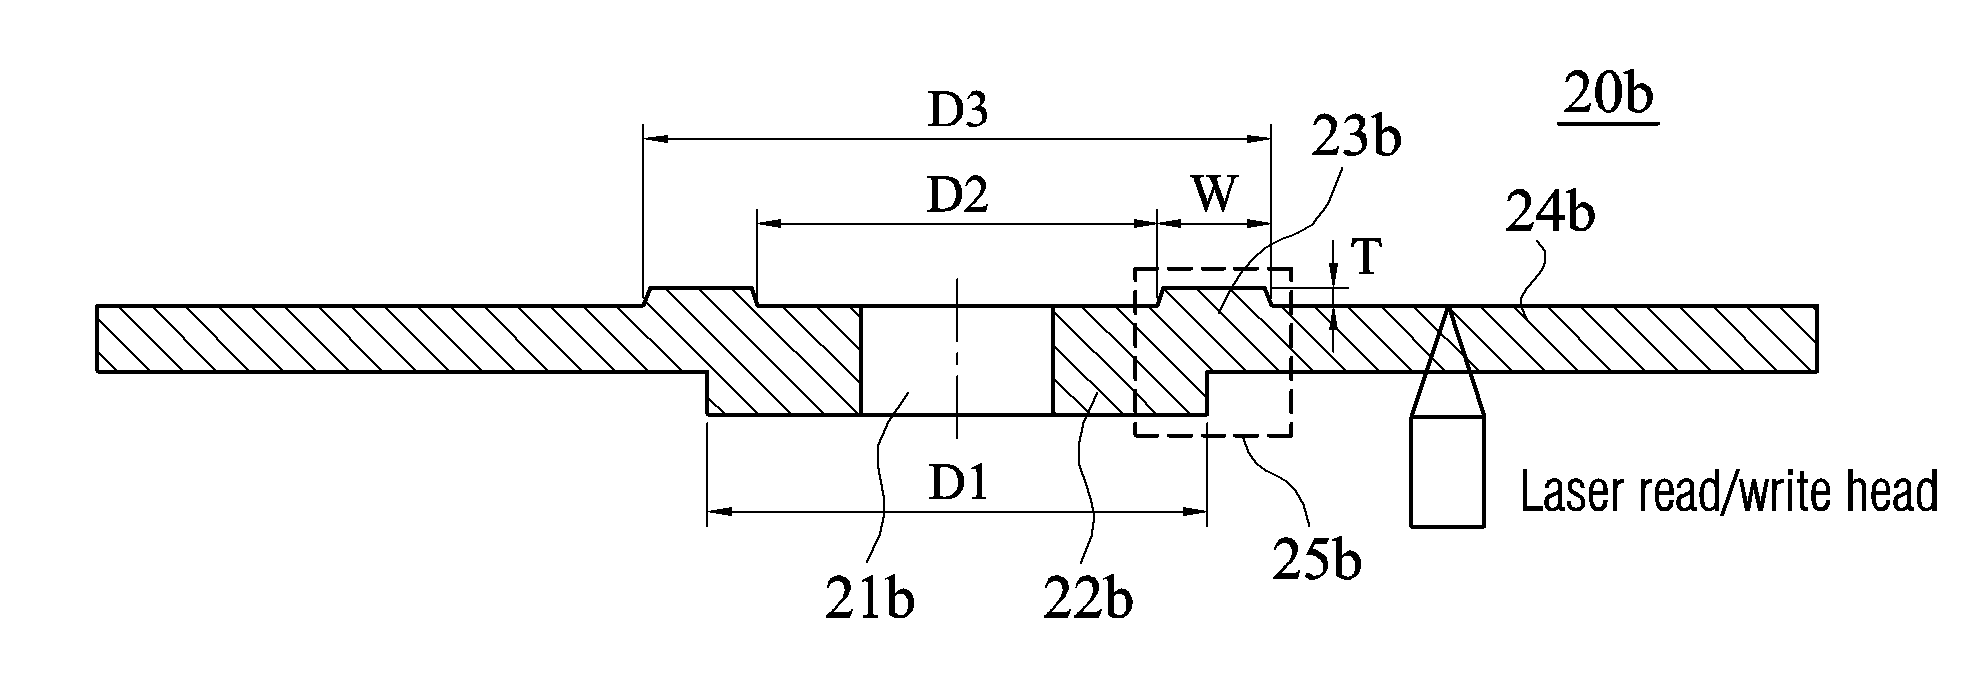 Optical disc with thicker supporting section and thinner recording section